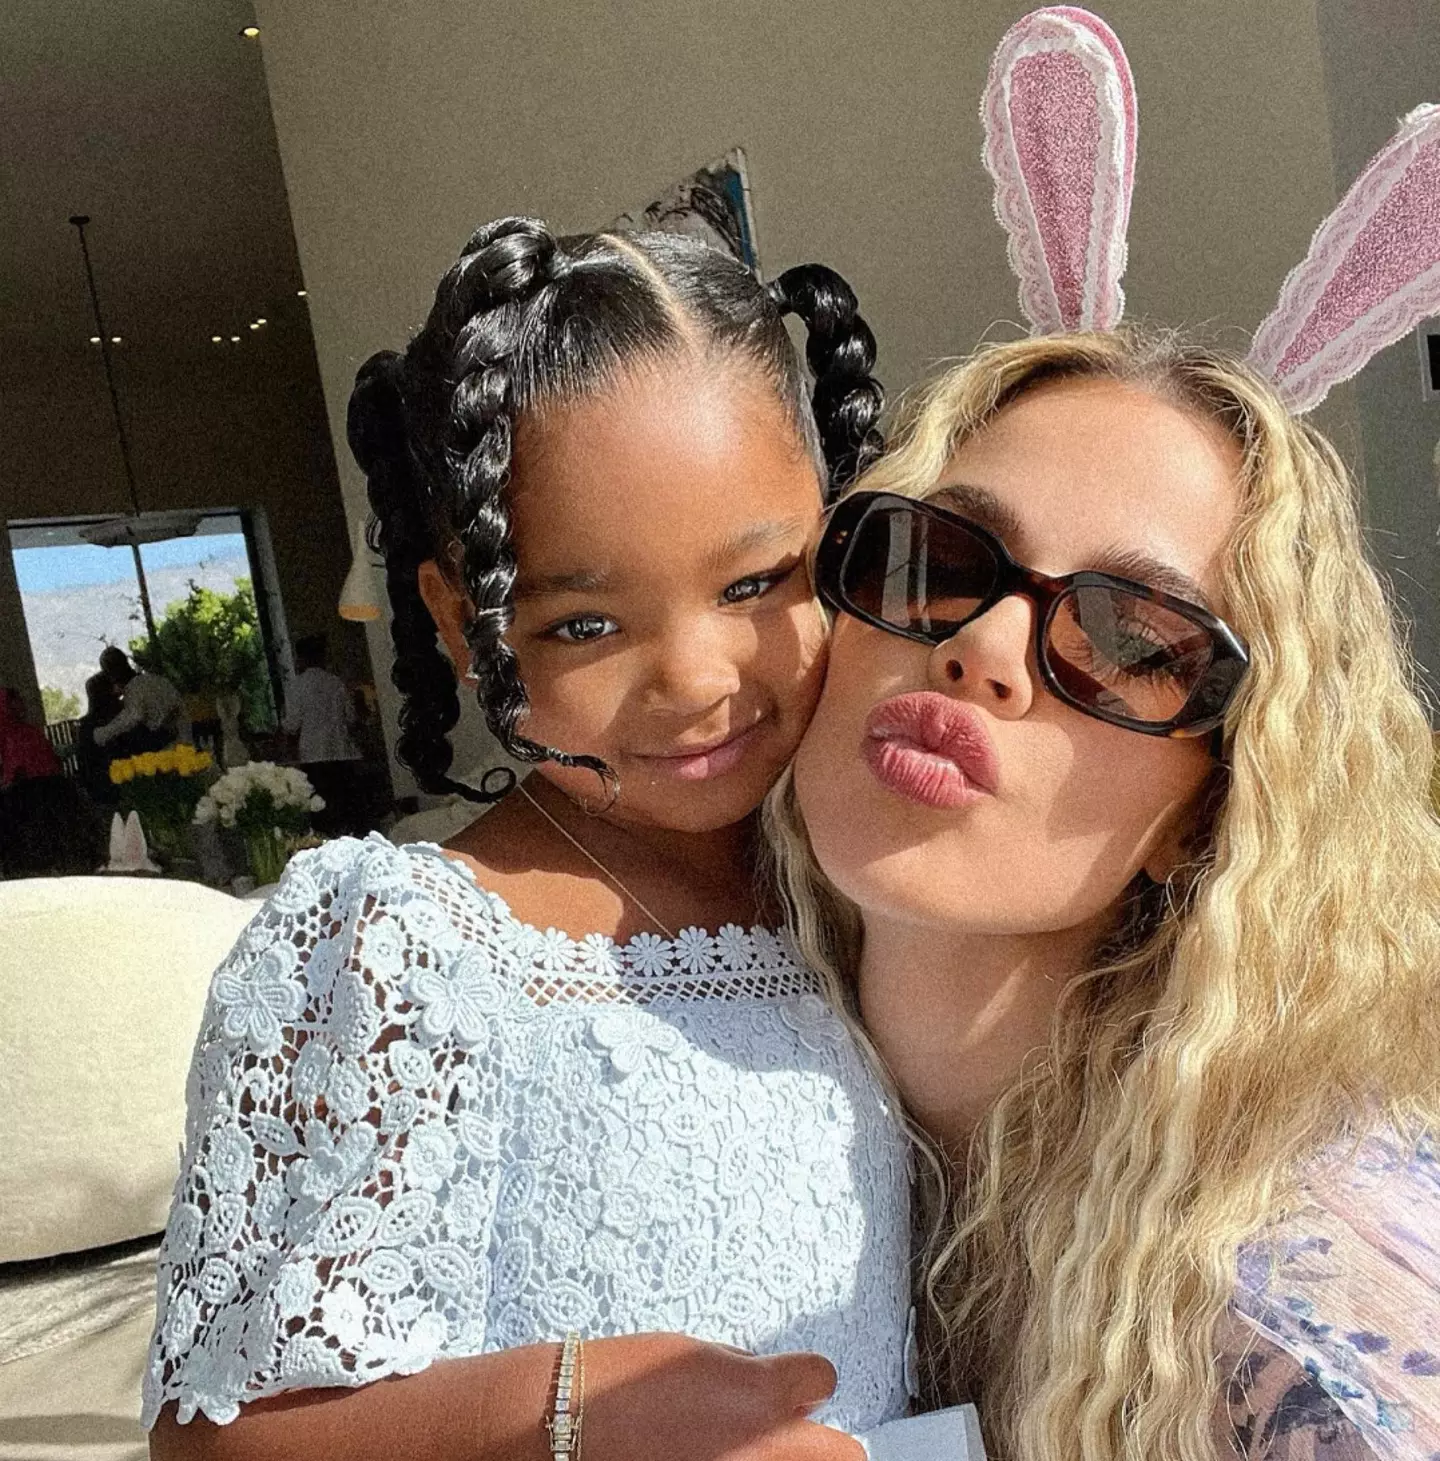 Khloé Kardashian has welcomed her second child.